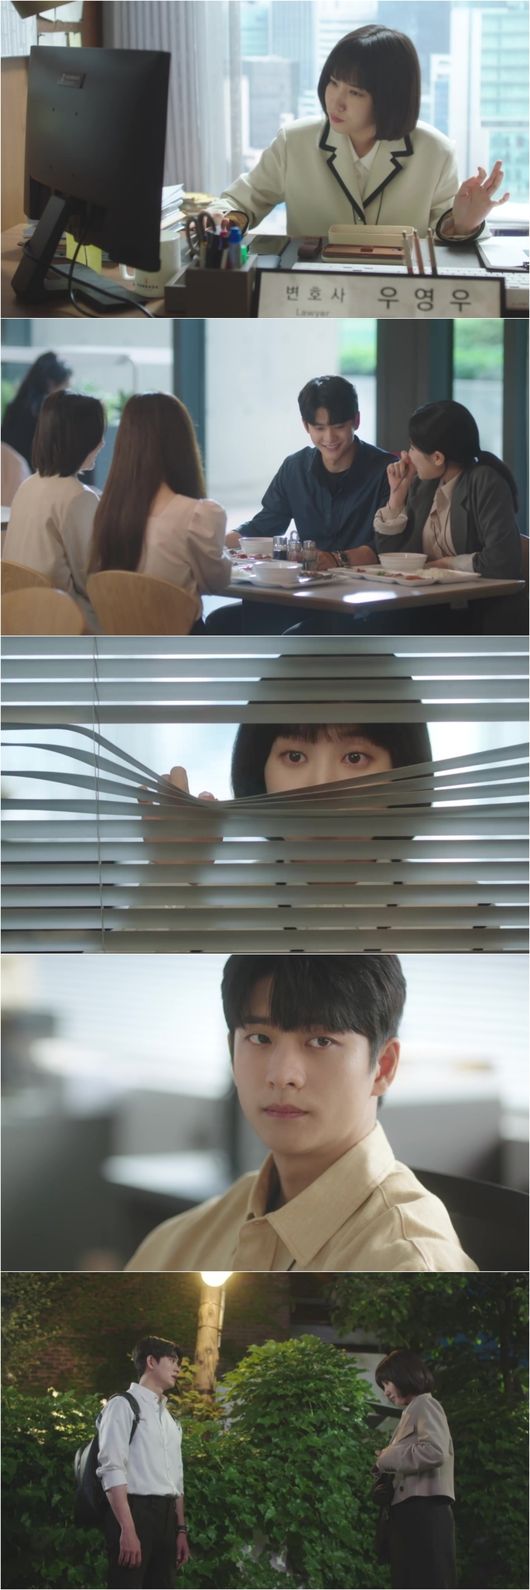 Park Eun-bin and Kang Tae-oh suffer from the aftermath of separation.ENA channel Extraordinary Attorney Woo (director Yoo In-sik, playwright Moon Ji-won, production AKahaani, KT Studio Ginny and Romantic Crewe) on the 16th, and Wooyoungwoo (Park Eun-bin) and Lee Joon-ho (Kang Tae-oh) who returned from a trip to Jeju Island He revealed his changed daily life.Two people pretend to not know each others vacancies but can not hide their empty minds. I wonder about the end of the Whale Couple romance.In the last broadcast, Wooyoungwoo and Hanbadaj went on a group trip to Jeju Island, where they were sued for the return of unfair profits for the collection of cultural property fees.And they faced each others awakening and change, especially Wooyoung, who faced the Chest sick reality in his meeting with sister Lee Joon-ho.Wooyoungwoos choice was parting, thinking that he could never make his loved one happy.Wooyoung Woo, who turns around with only the words Im sorry, and Lee Joon-ho, who is left alone and shed tears, made viewers eat Chest.In the meantime, the photos show the daily life after the separation of Wooyoungwoo and Lee Joon-ho, two people who spend their lunch time talking about whales.Wooyoungwoo, who is eating alone in his room, contrasts with Lee Joon-ho, who is surrounded by other employees, and adds sadness.Wooyoungwoos lonely eyes were also caught peeking at Lee Joon-ho through the gap in the blinds, notifying him of his farewell in Chest painful words, but his mind once bloomed is not easily lost.But Lee Joon-ho, who has to accept the separation without knowing why, is also confused. His eyes are sad as he turns his head as if he felt the gaze of Wooyoungwoo.Wooyoungwoo and Lee Joon-ho, who face each other again, are focused on whether they can turn their minds to Wooyoungwoo.In the 15th episode, which will be broadcast on the afternoon of the 17th, Hanbada will be commissioned by a large online shopping mall that leaked 40 million personal information and was charged with a fine of 300 billion won due to the damage of speech phishing.Jang Seung-jun (Choi Dae-hoon) will take charge of the case with new lawyers on behalf of Chung Myung-seok (Kang Ki-young), who has left his position.Wooyoungwoo, Lee Joon-ho meet the afterstorm, said the production team Extraordinary Attorney Woo Woo.I want you to see if they will accept and part from the sick reality, or if they will be more courageous to convey their sincerity.We also want to pay attention to the activities and growth of new lawyers who have faced previous cases without Jeong Myung-seok.The 15th Extraordinary Attorney Woo will be broadcast on ENA channel at 9 pm on the 17th, and will also be released through seezn (season) and Netflix.AKahaani and KT Studio Ginny and Romantic Crewe